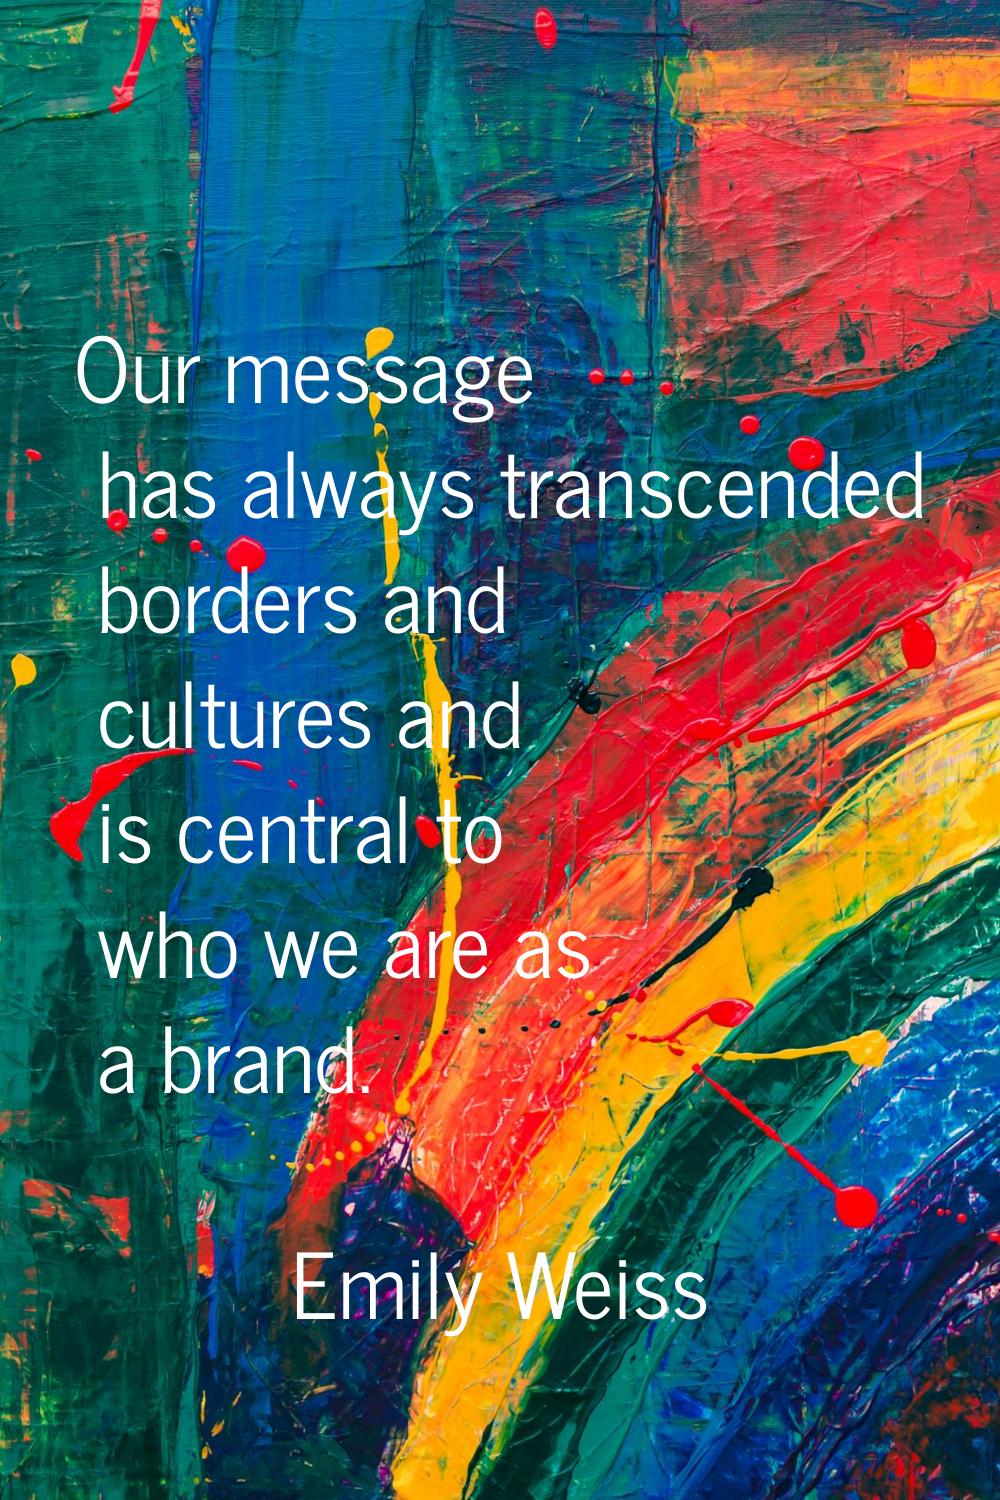 Our message has always transcended borders and cultures and is central to who we are as a brand.